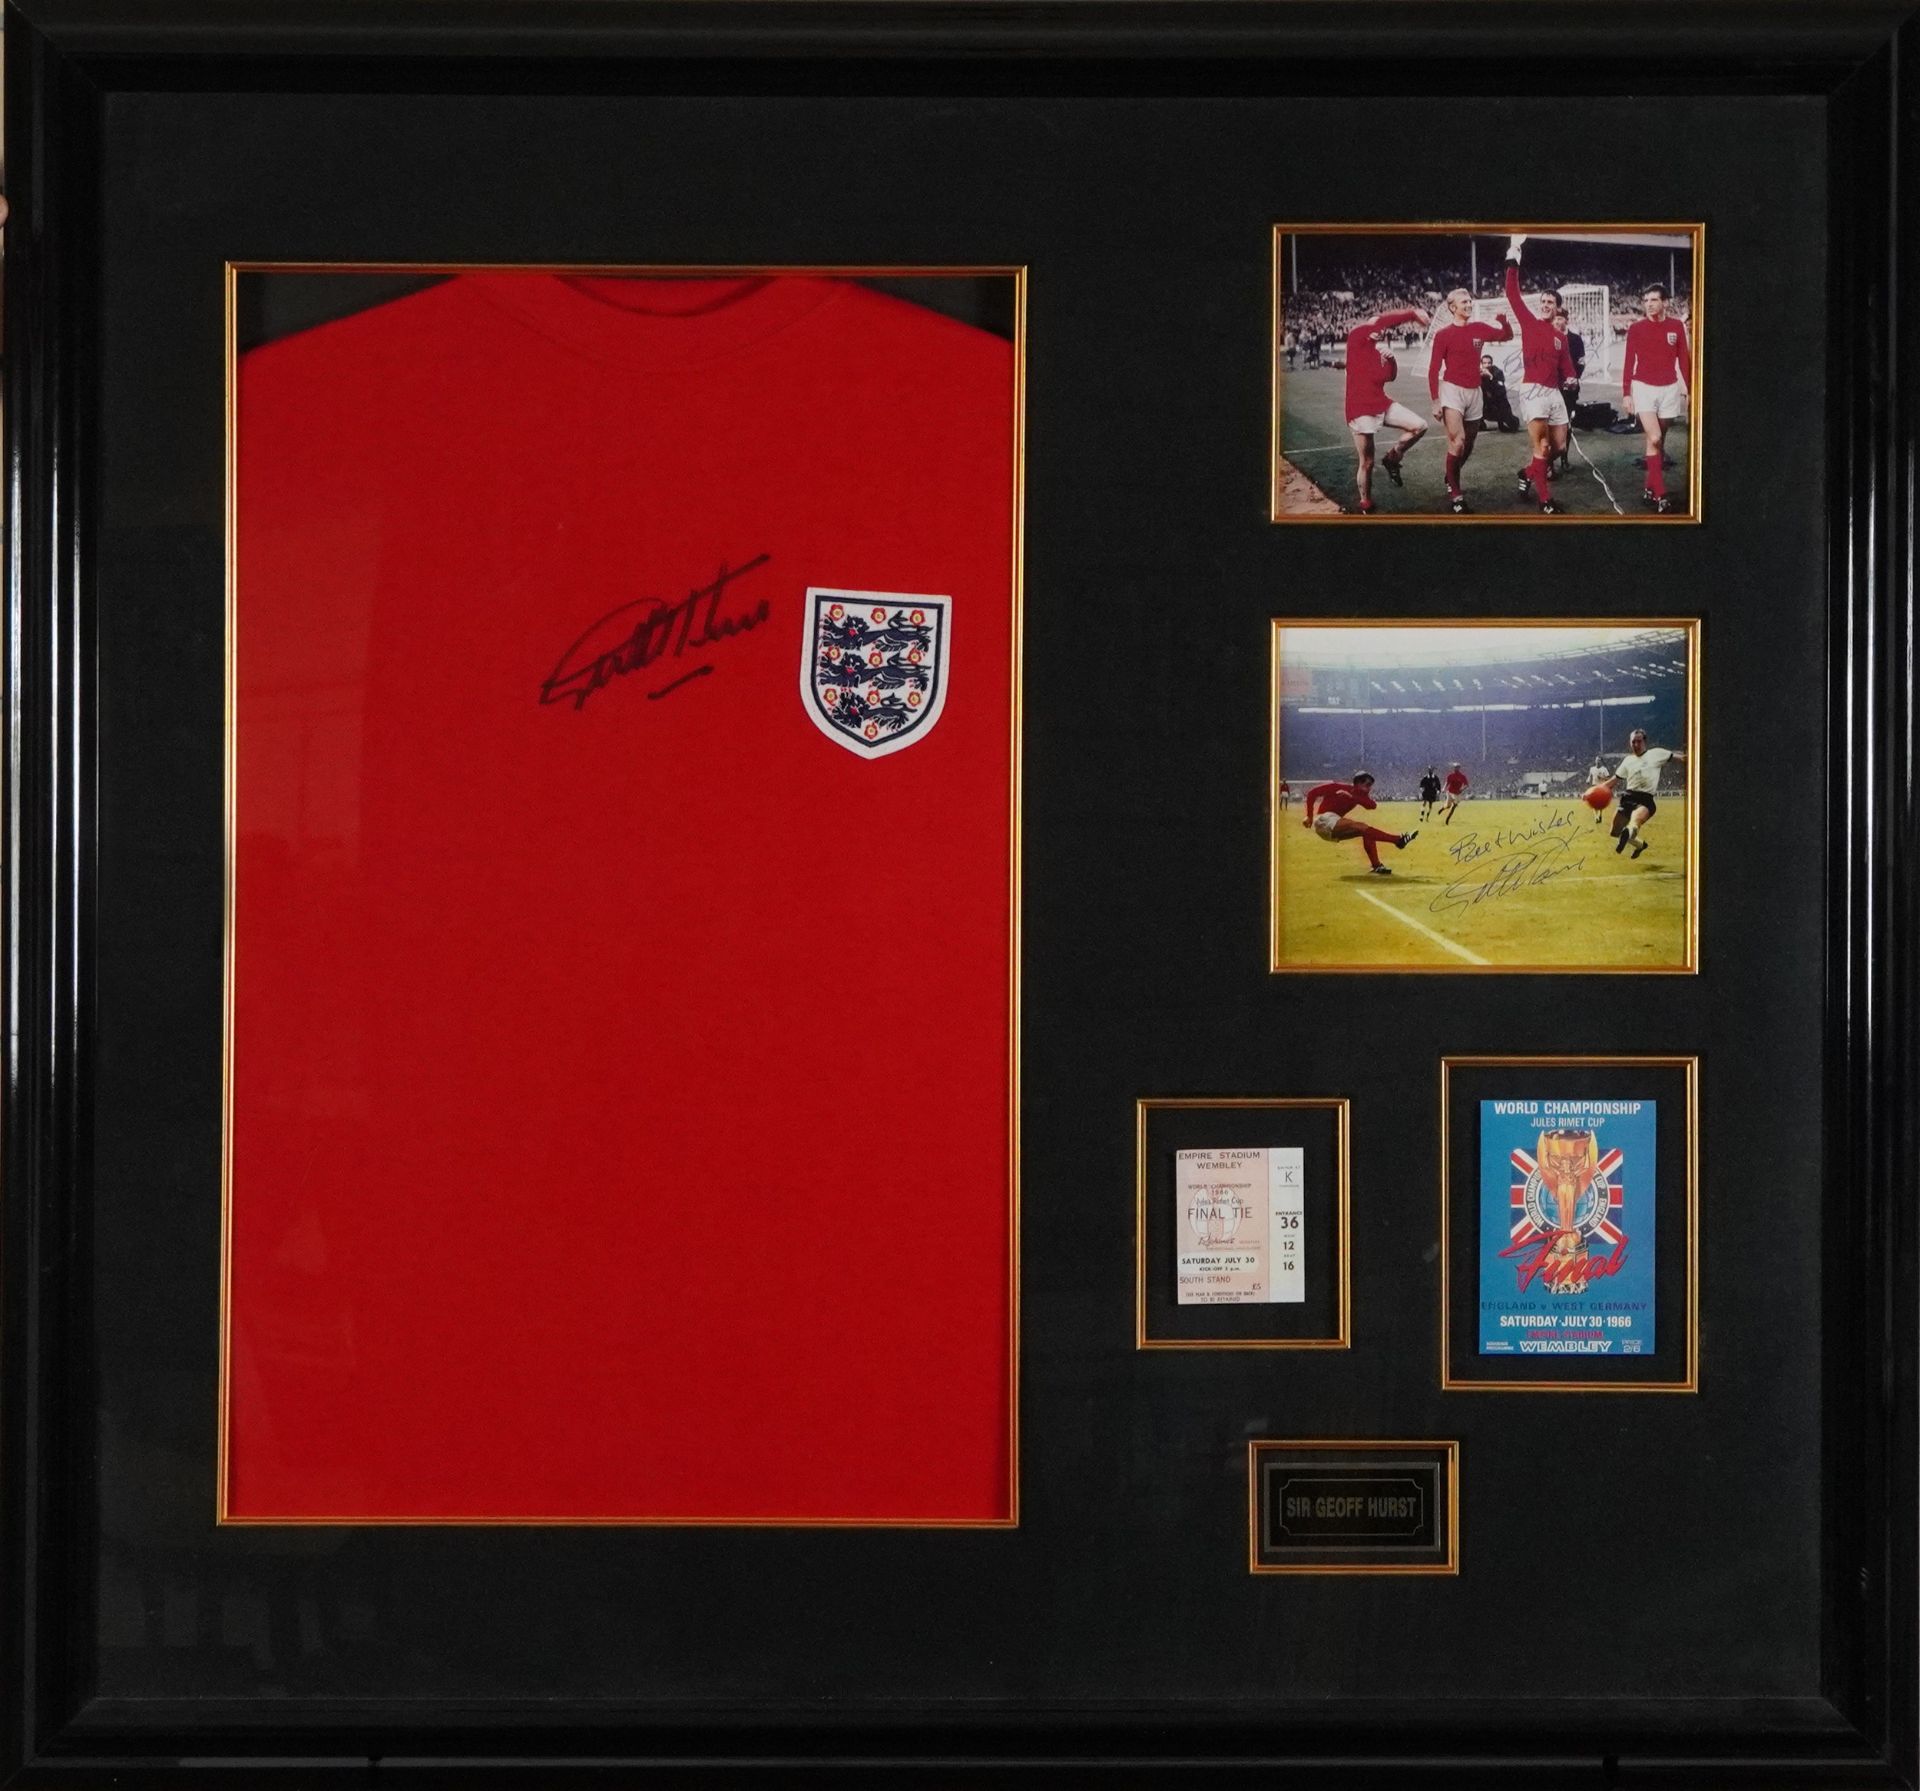 Footballing interest Sir Geoff Hurst display with signed jersey and facsimile World Championship